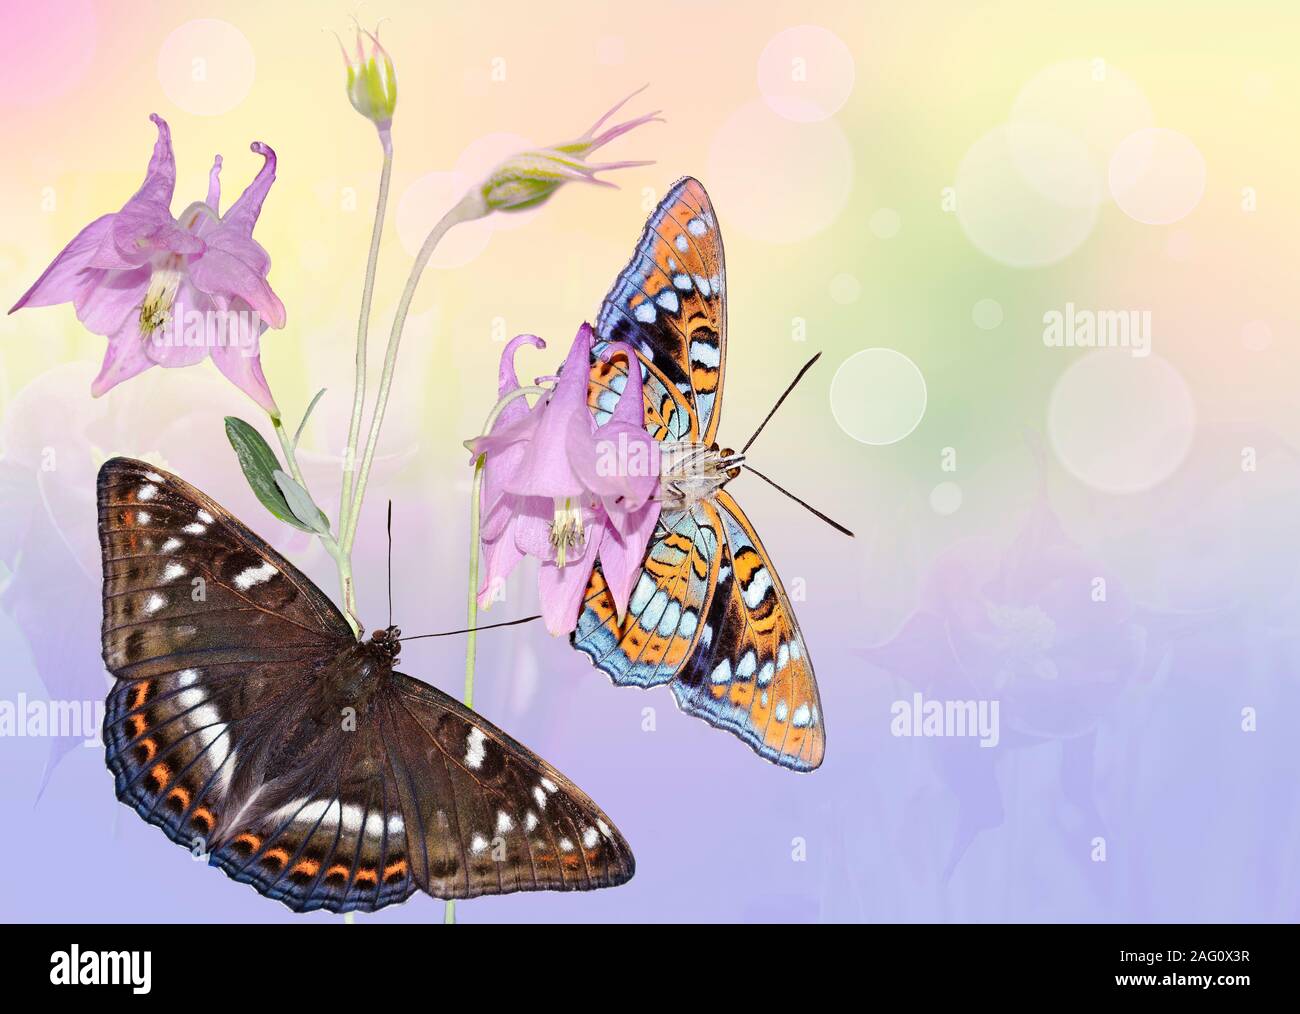 Artistic image of two butterflies limenitis populi sitting on pink aquilegia flowers. Coloring the upper and lower sides of the butterfly wings. Soft Stock Photo